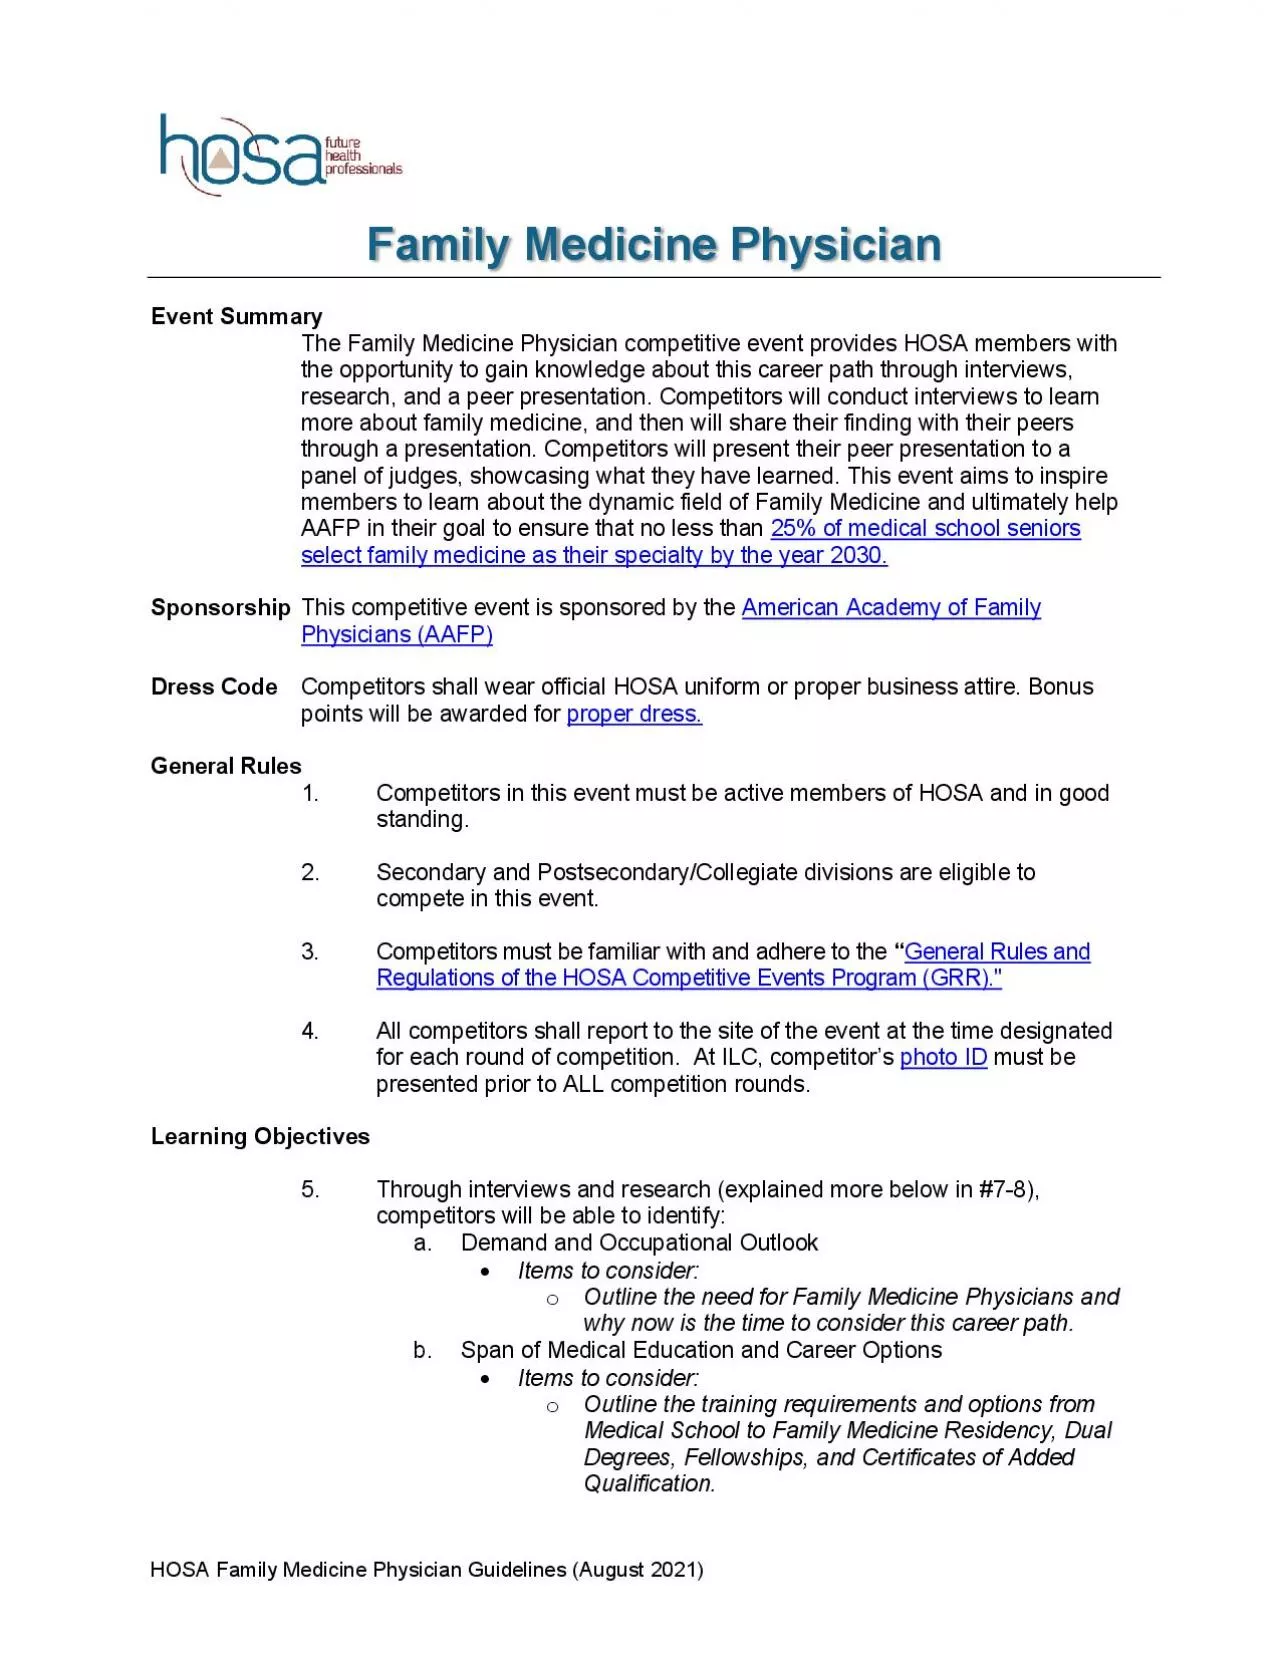 x0000x0000HOSA Family Medicine PhysicianGuidelines August